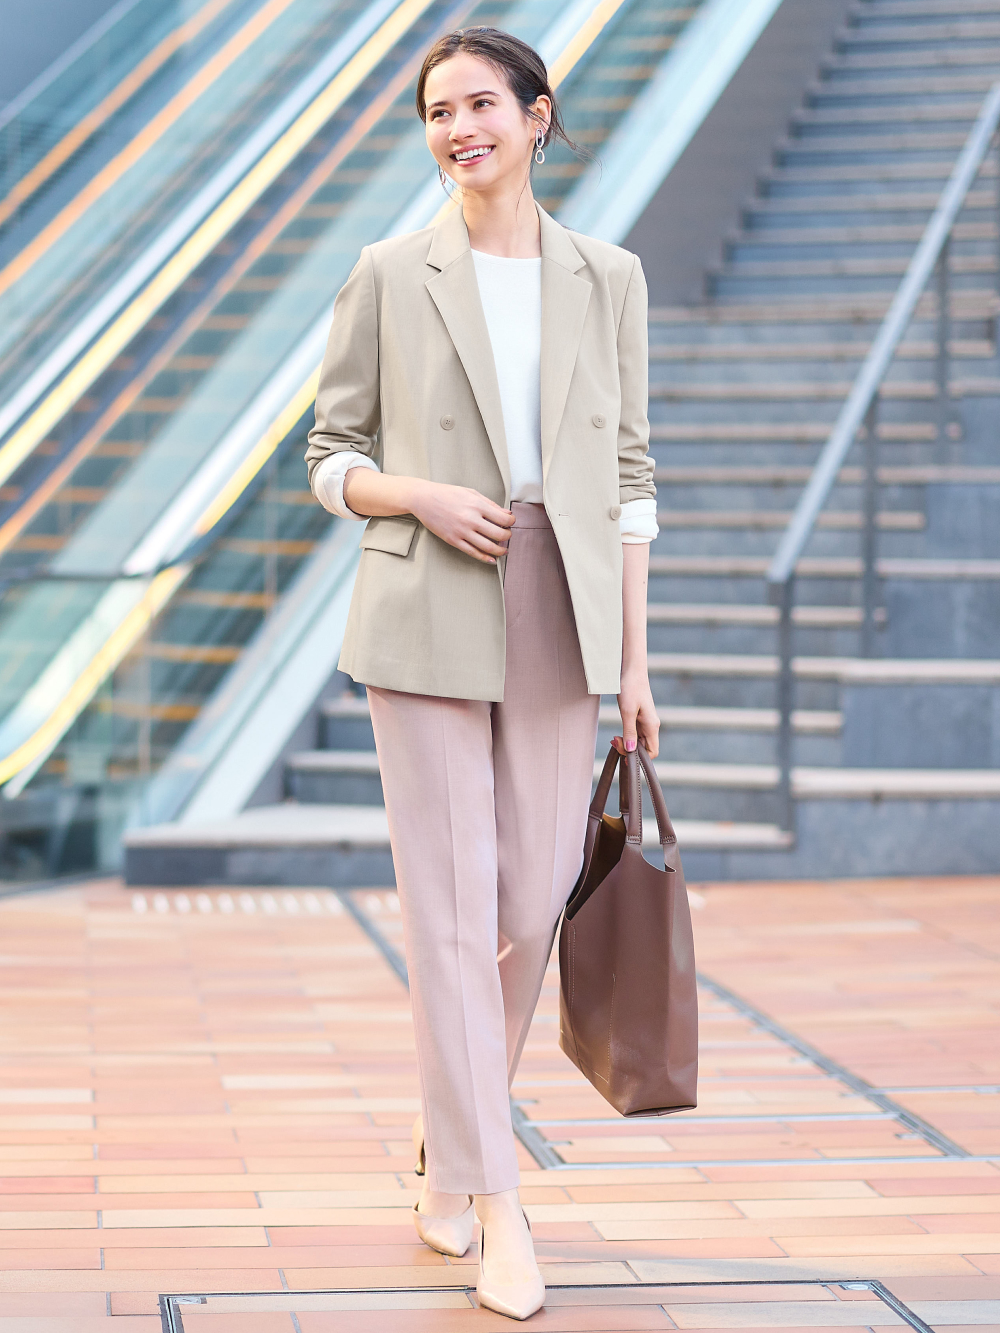 Shop looks for「AirSense Jacket、Smart Ankle Pants (2-Way Stretch)」